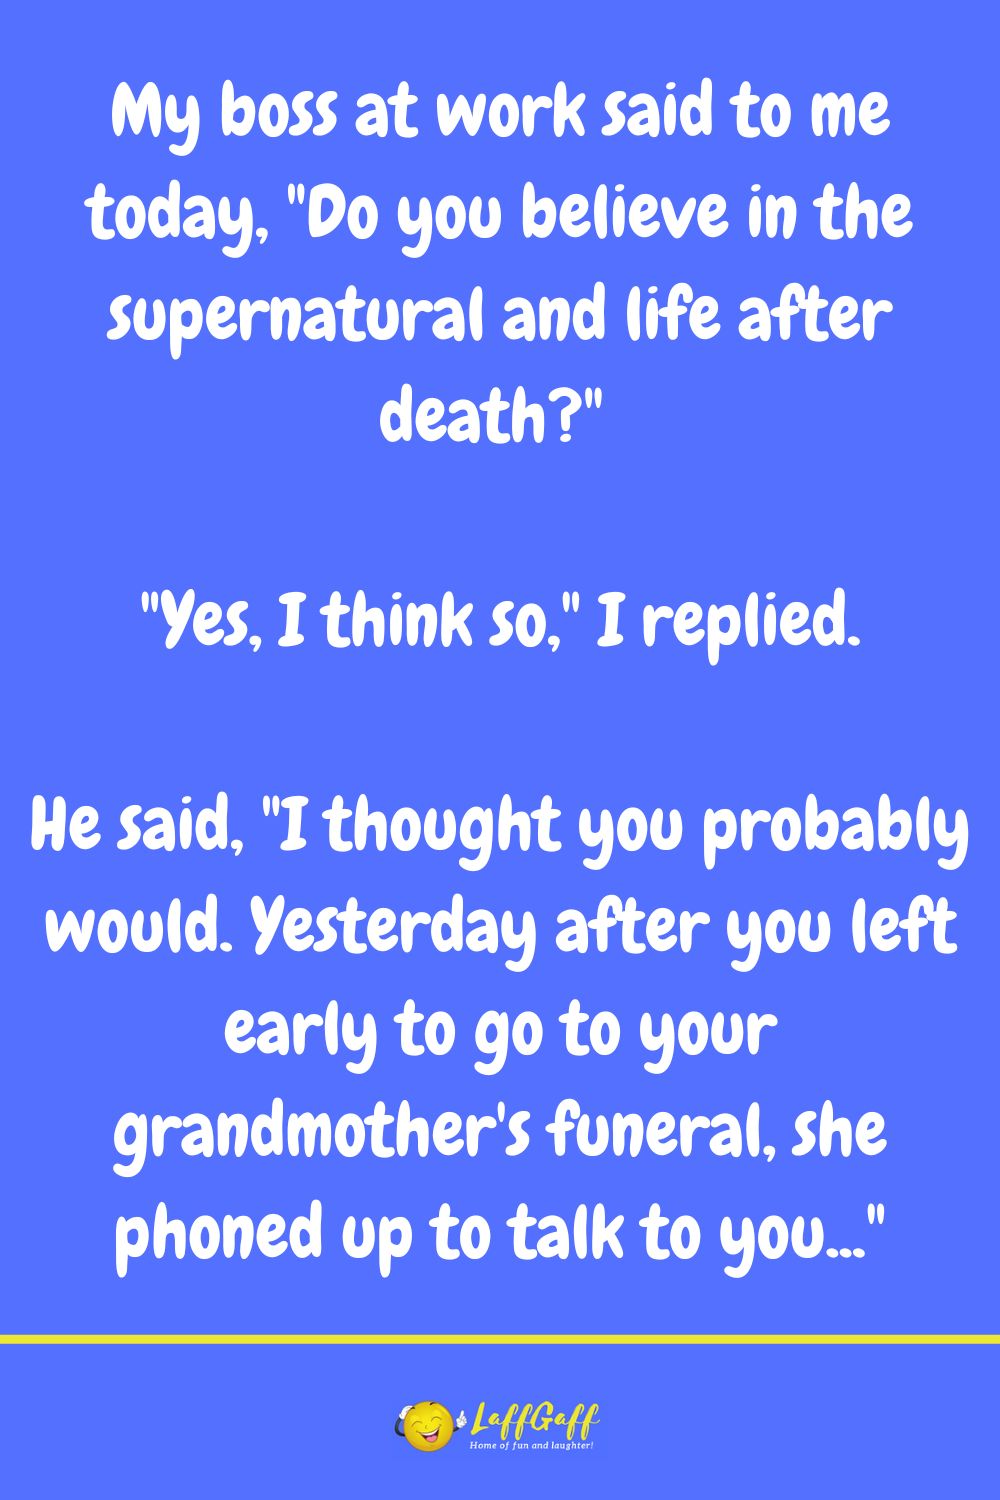 Life after death joke from LaffGaff.